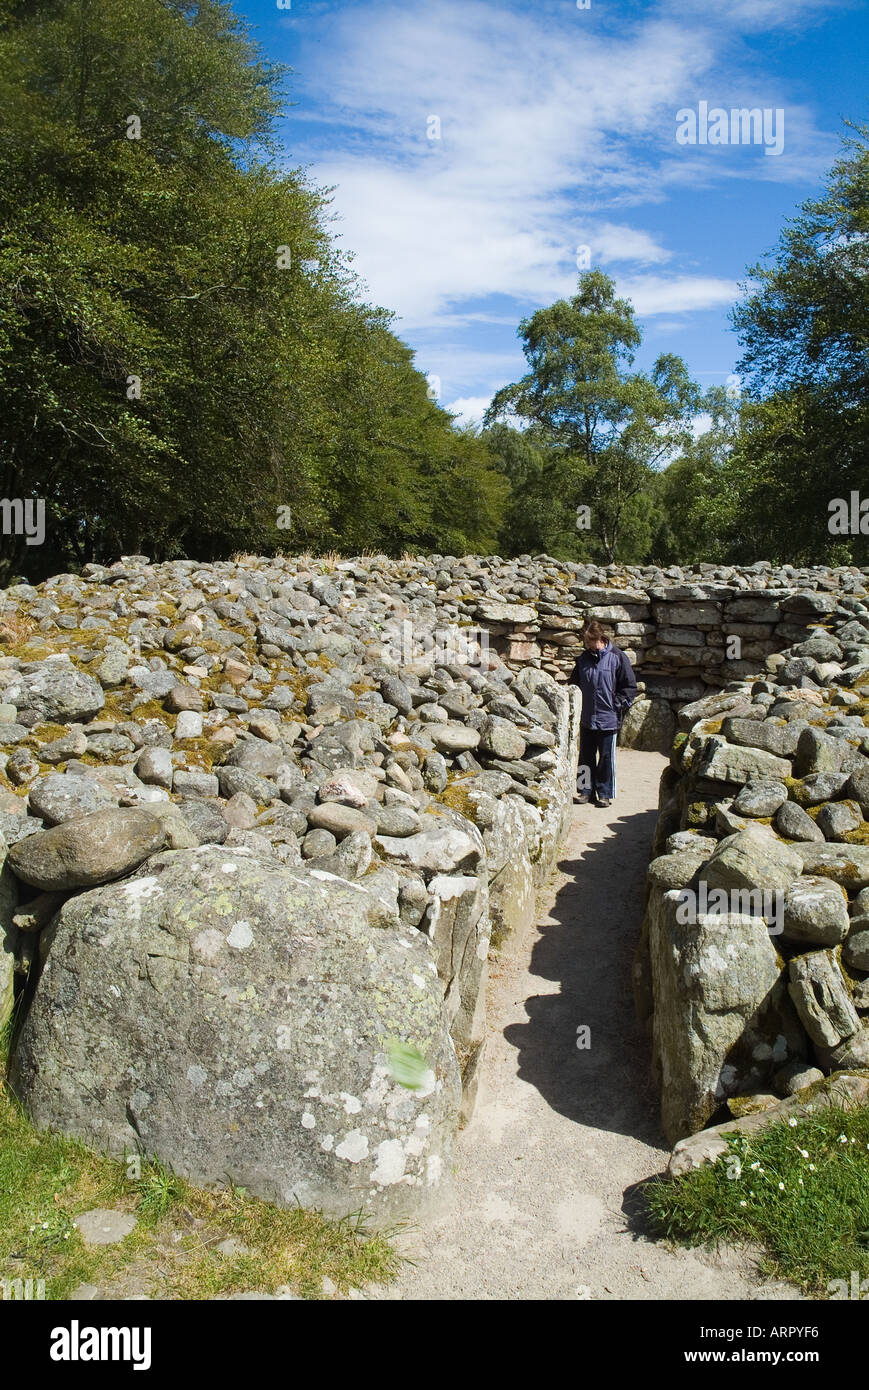 dh Balnuaran of Clava CLAVA INVERNESSSHIRE Bronze age burial mound chambered stone cairn scotland cairns Stock Photo